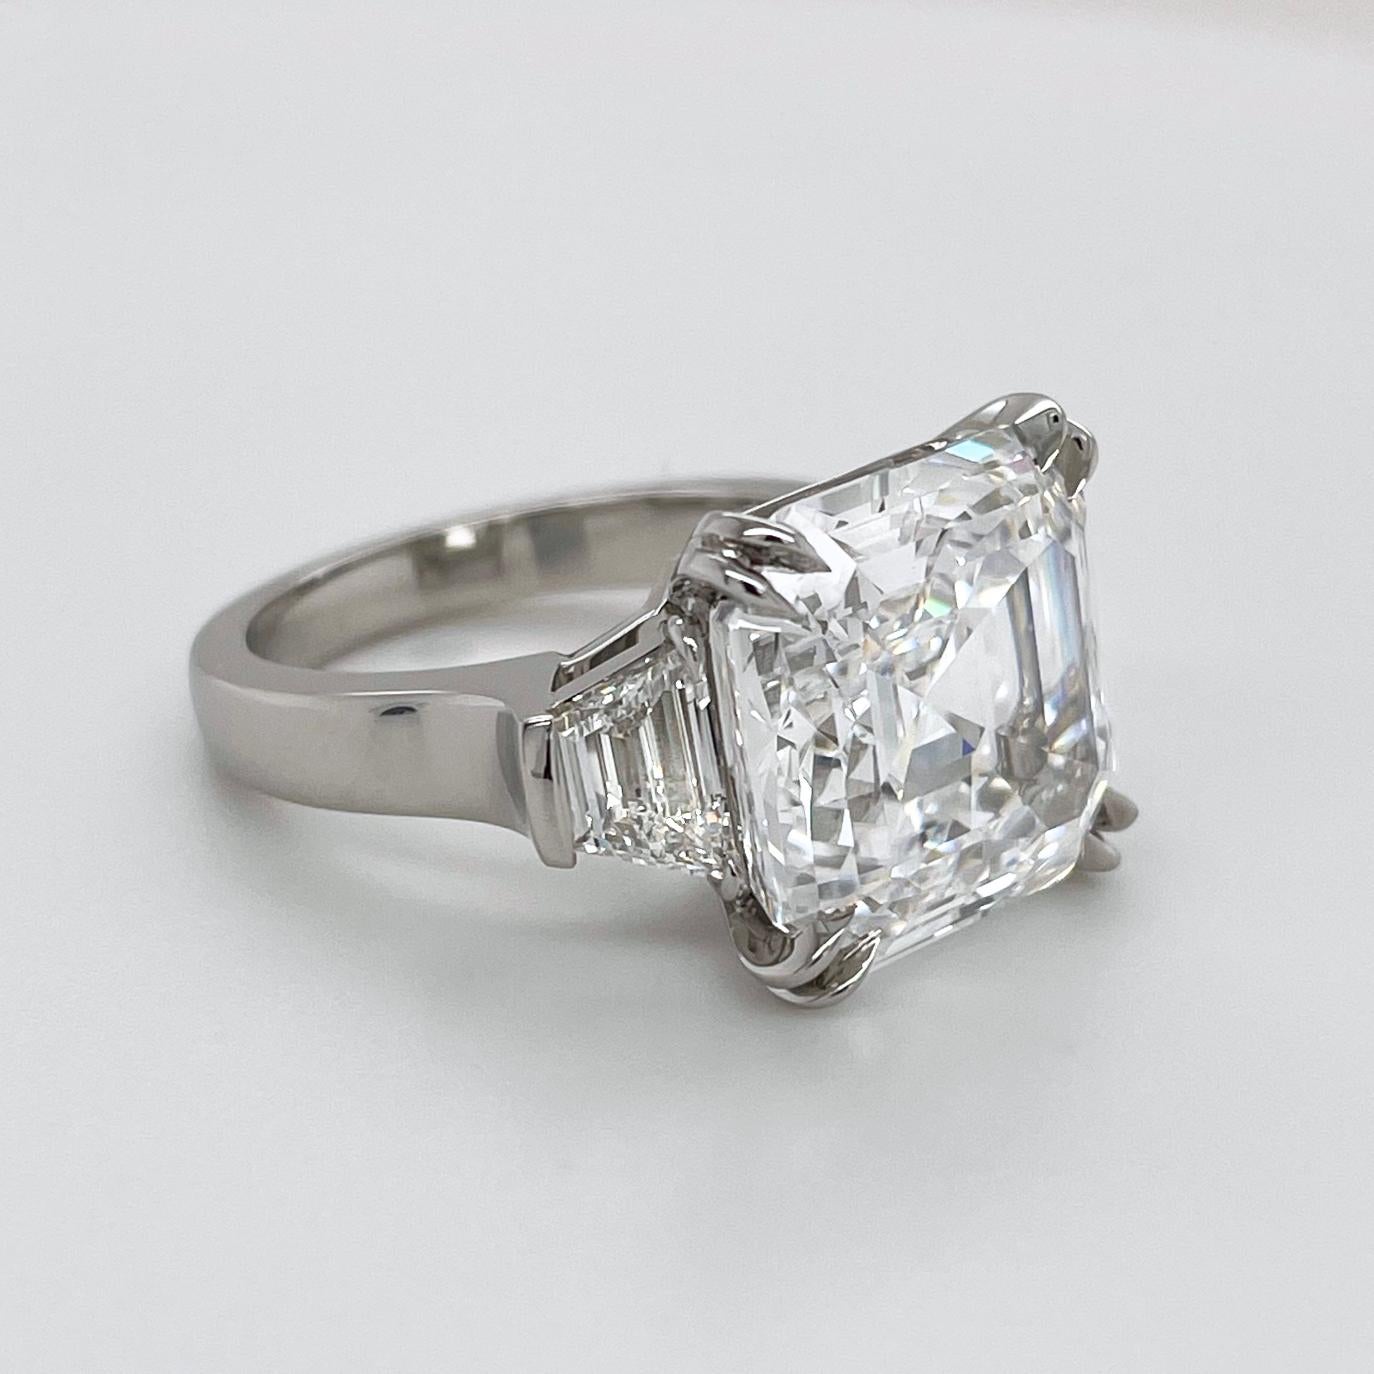 Contemporary 10.40 Carat D Flawless Square Emerald Cut Diamond Ring GIA Certified For Sale